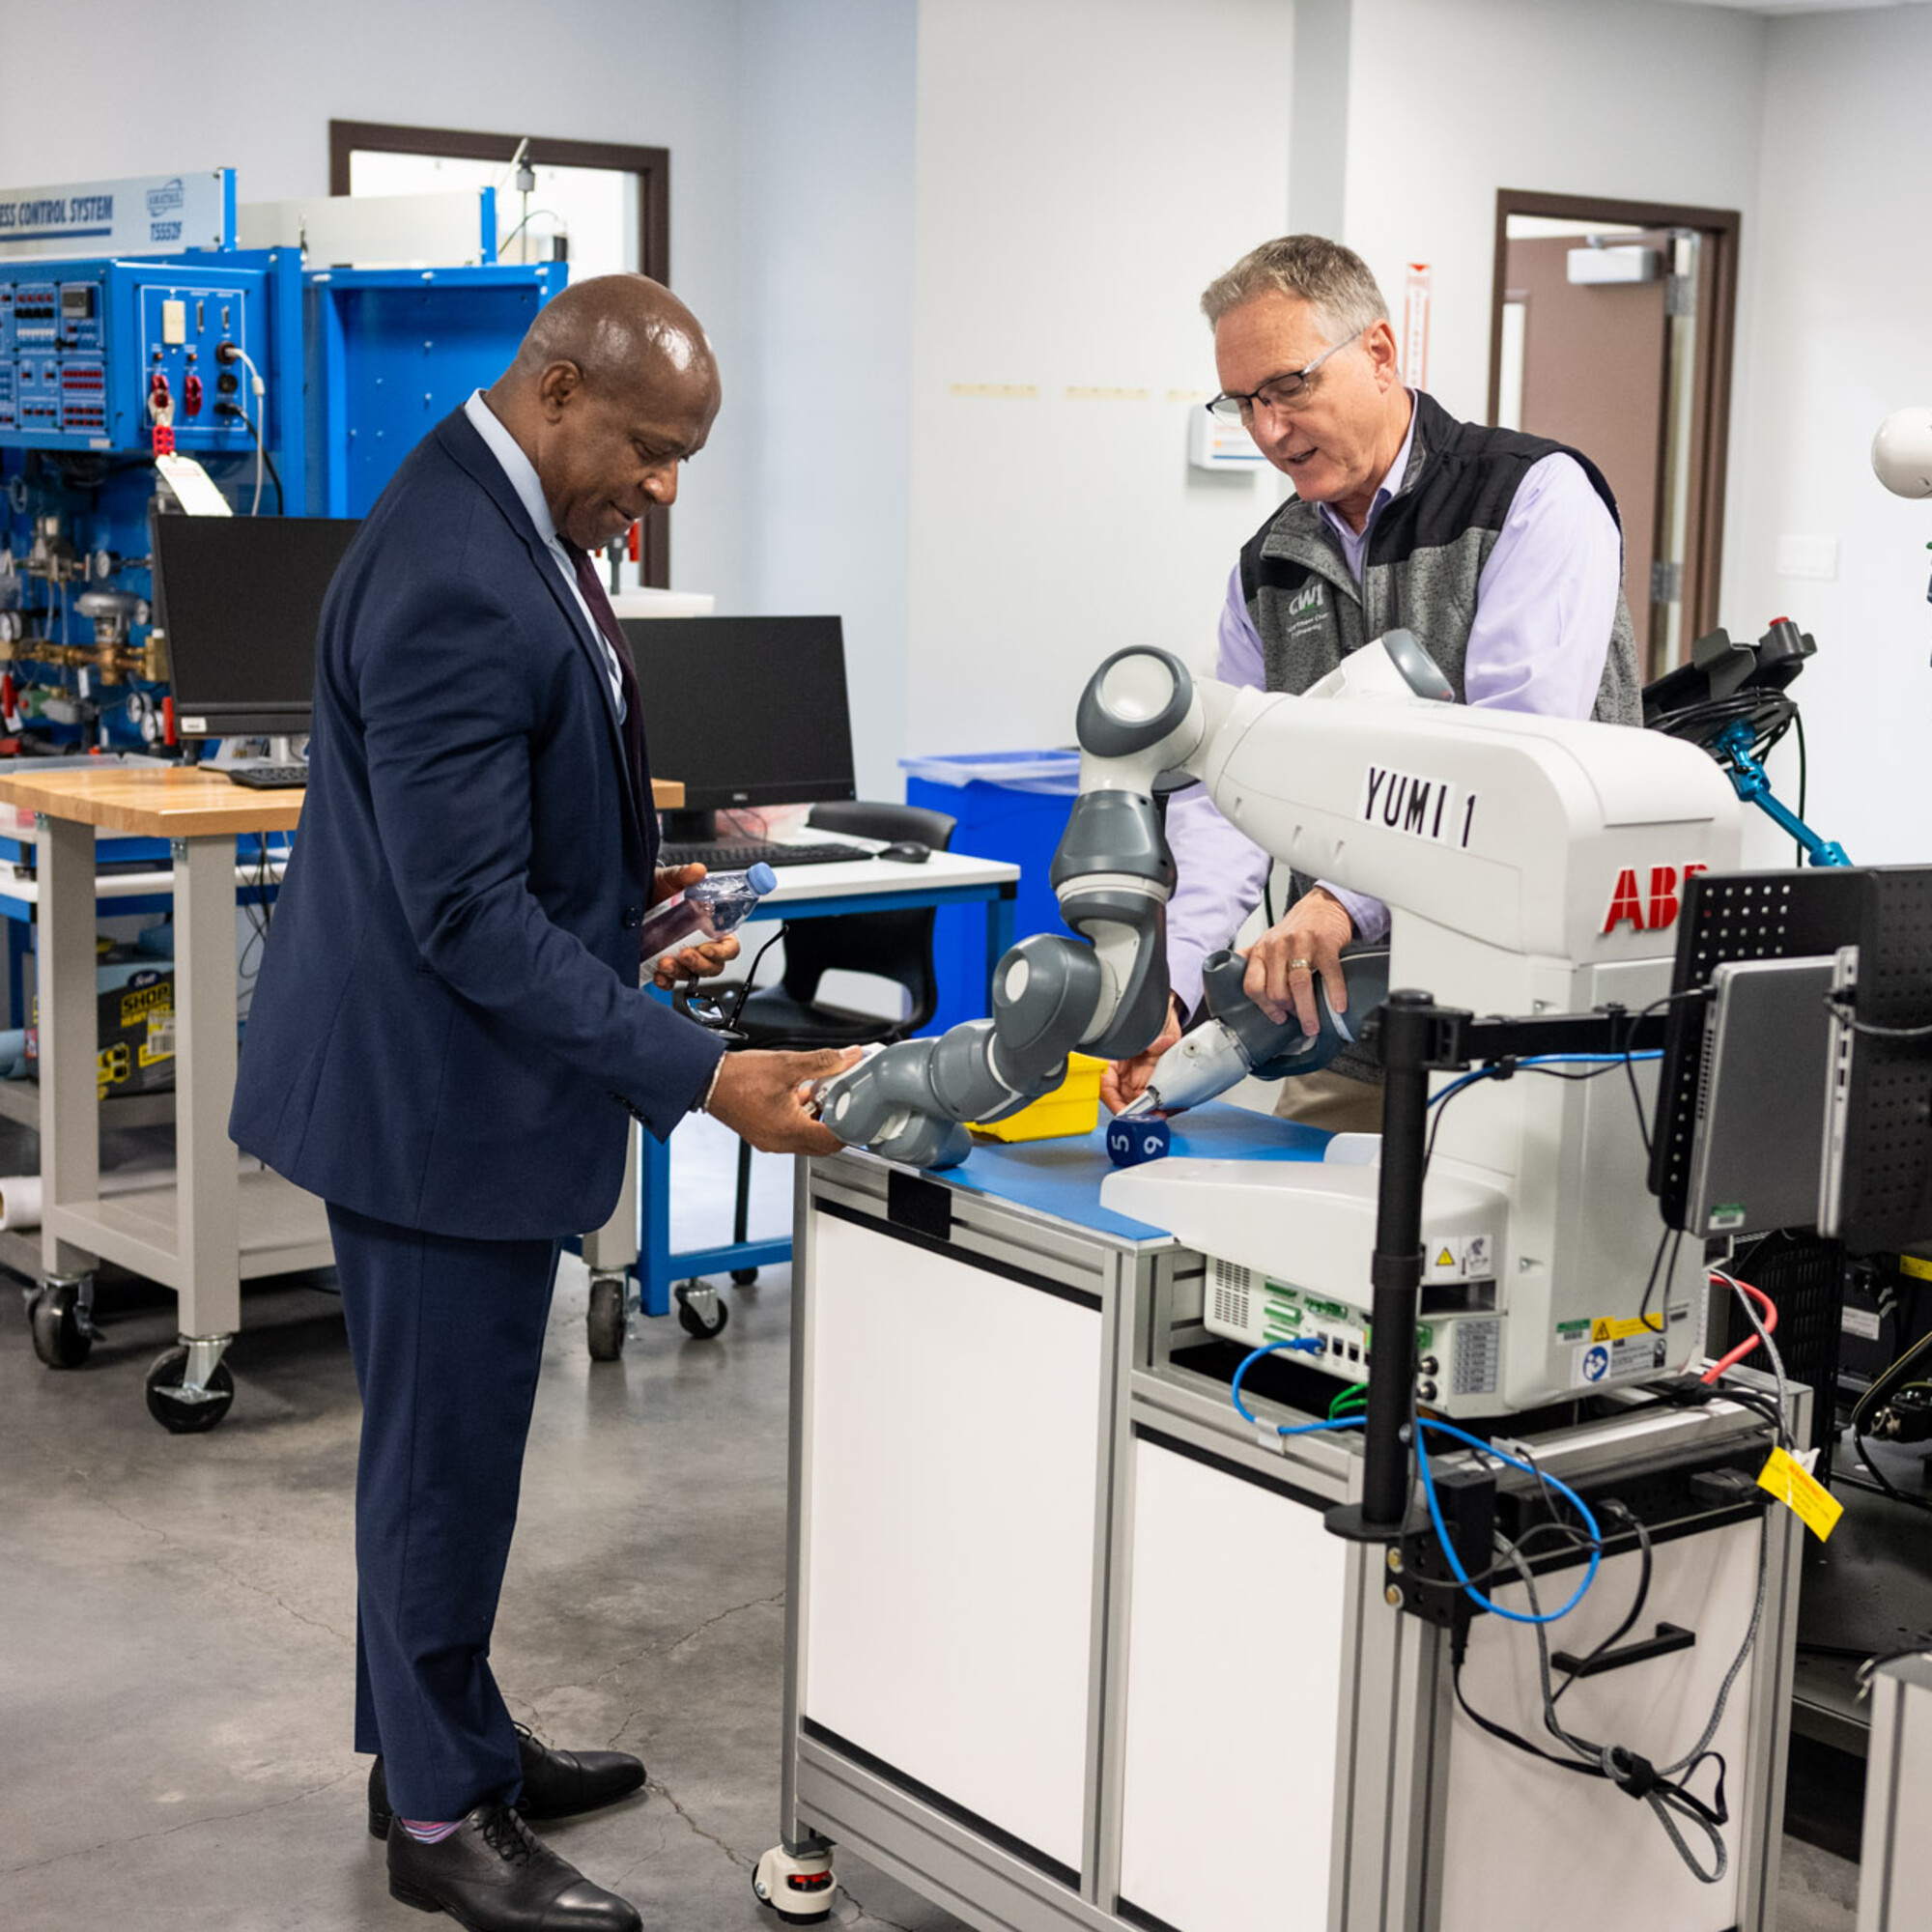 SUNY Oswego president Peter Nwosu inspects a robotic arm in the CWI Mechatronics Lab during a tour with Micron representatives.